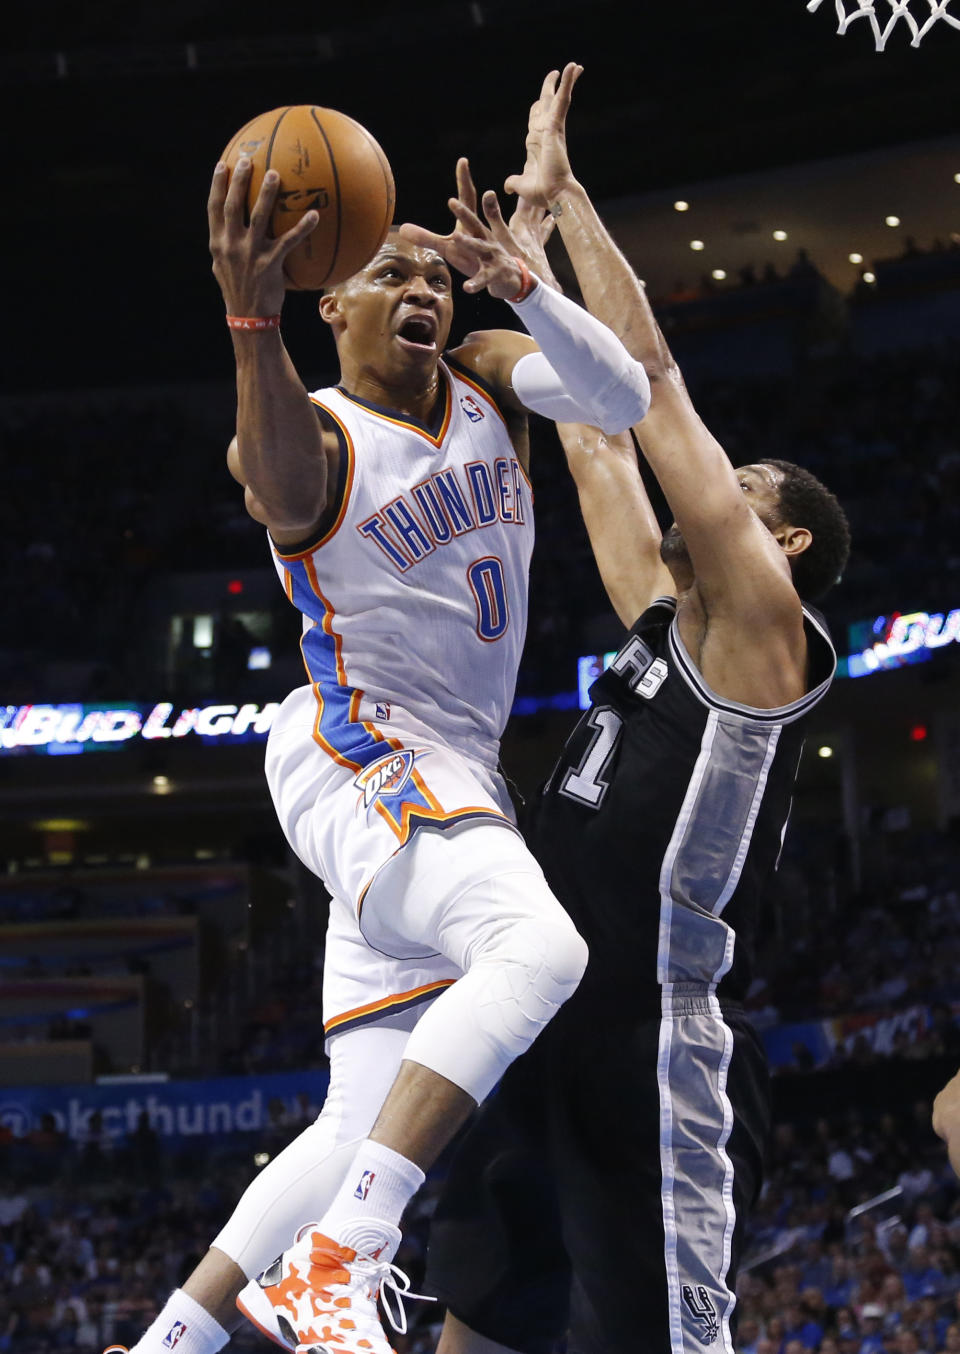 Oklahoma City Thunder guard Russell Westbrook (0) goes up to shoot as San Antonio Spurs forward Tim Duncan defends during the first quarter of an NBA basketball game in Oklahoma City, Thursday, April 3, 2014. (AP Photo/Sue Ogrocki)